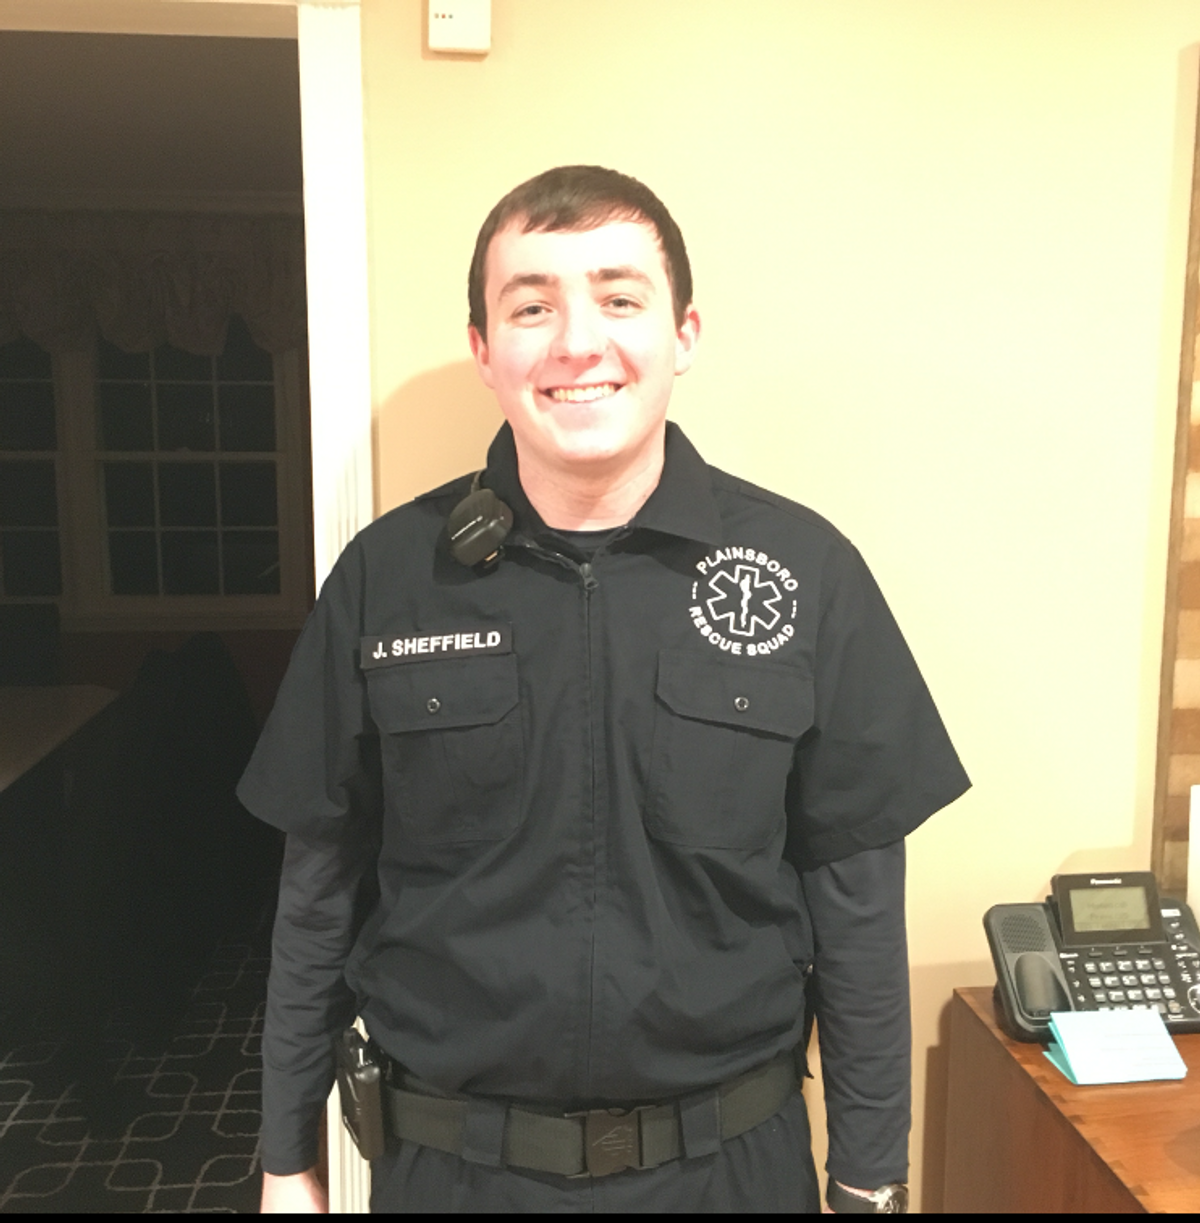 A Day In The Life Of EMS: Jason Sheffield